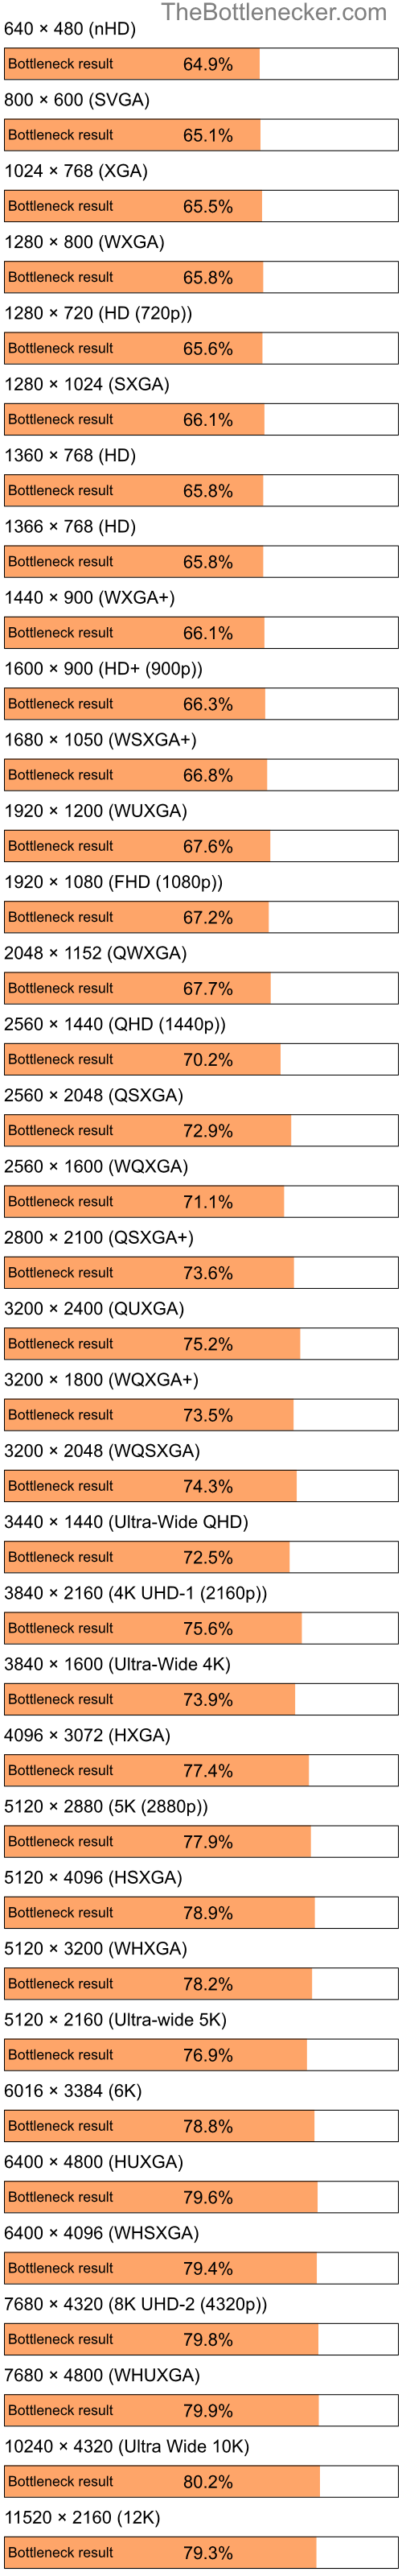 Bottleneck results by resolution for Intel Celeron M 410 and AMD Mobility Radeon HD 2300 in Processor Intense Tasks